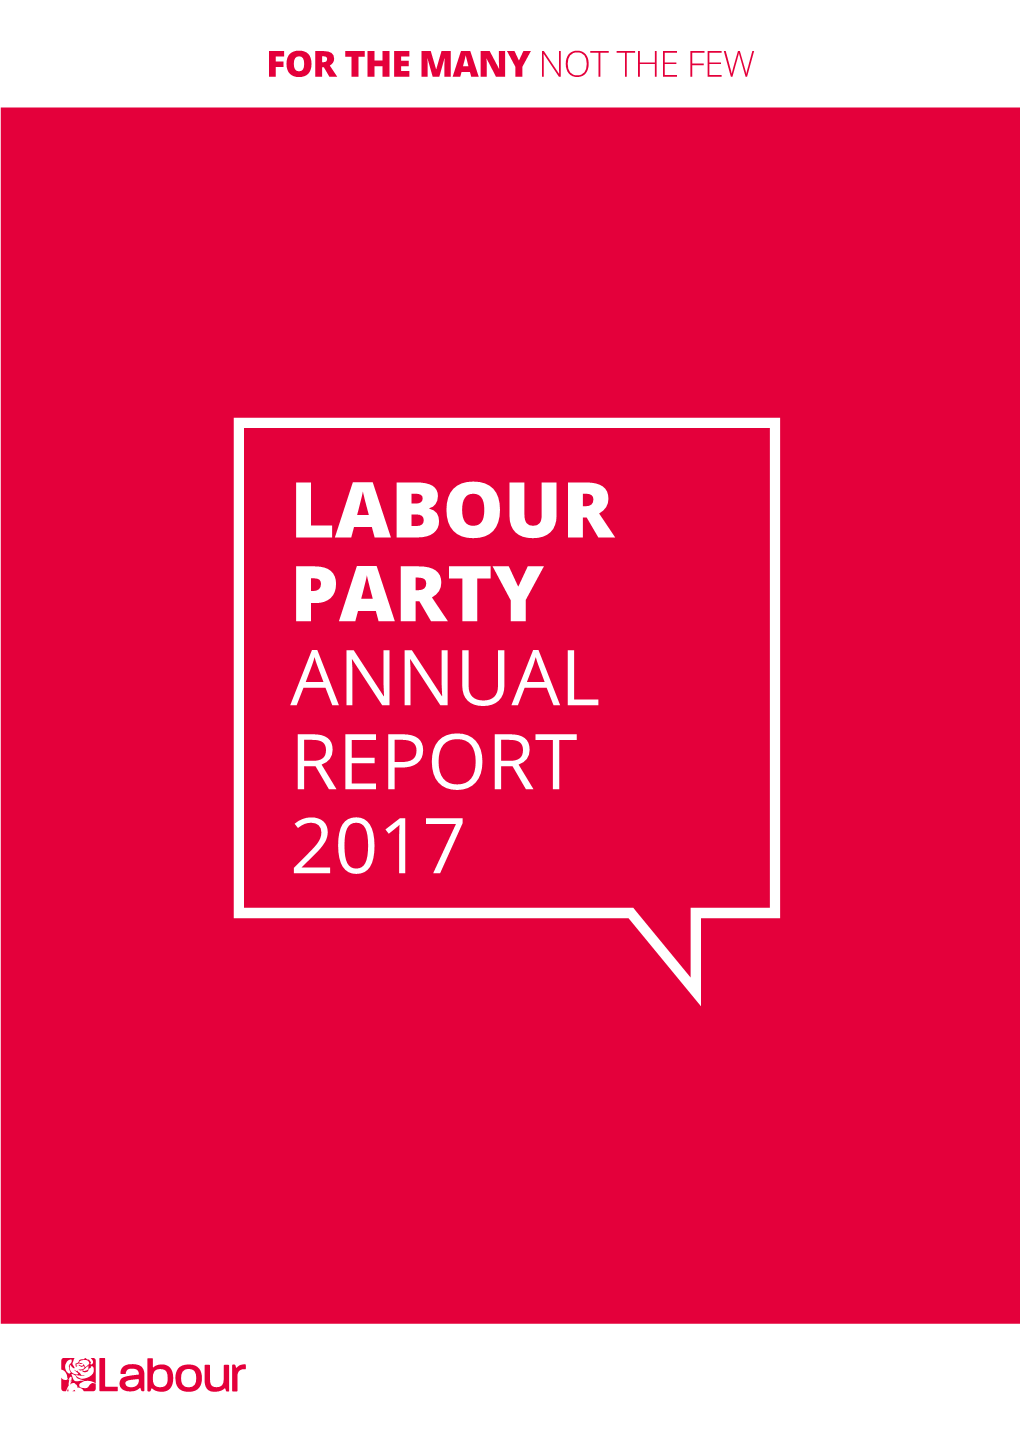 Labour Party Annual Report 2017 Introduction